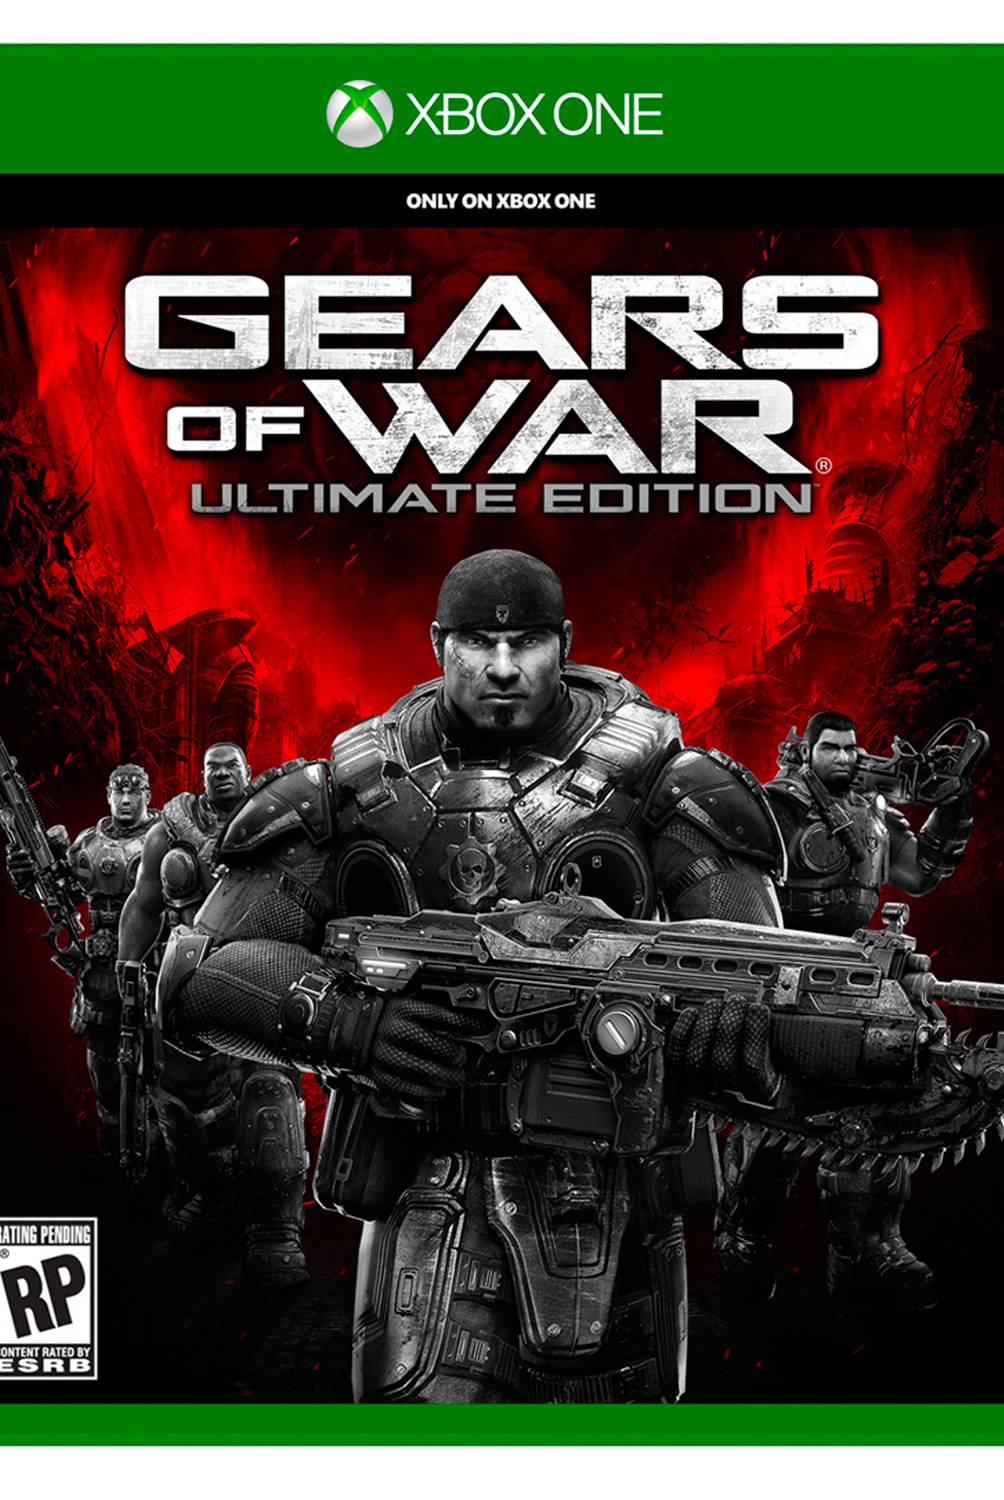 Xbox - Gears of War Ultimate Edition Xbox One